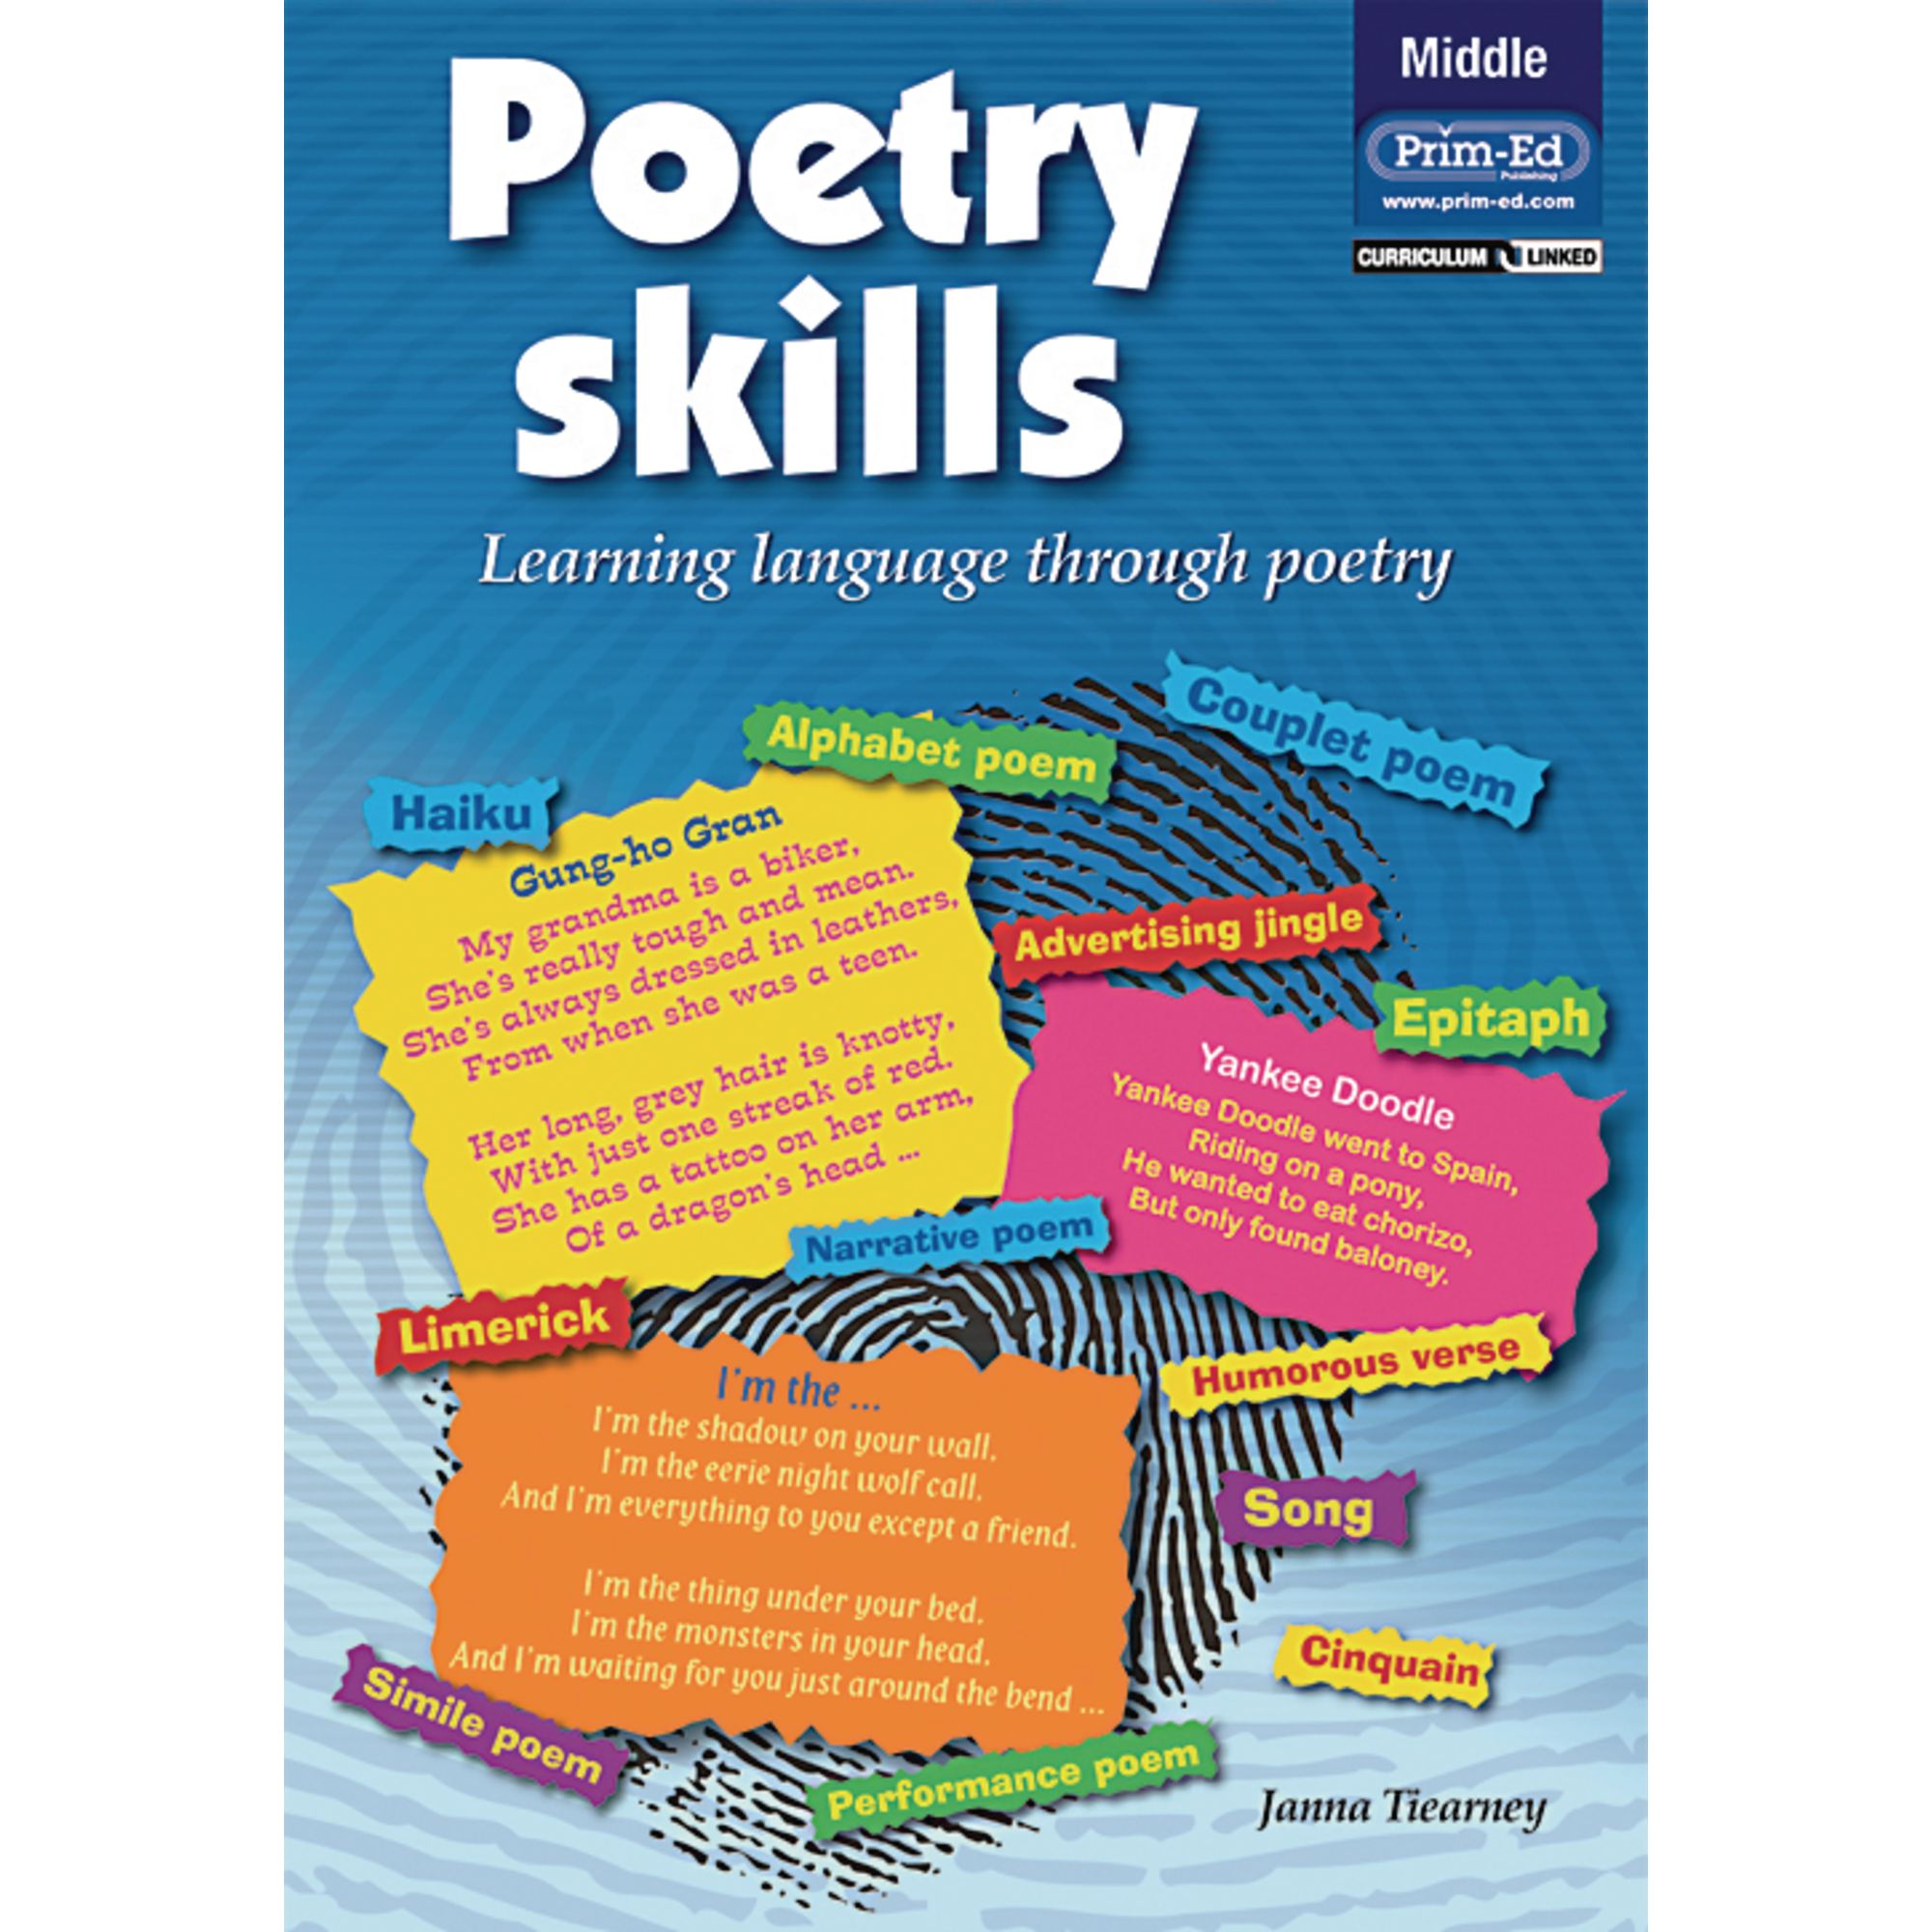 Poetry Skills - Middle 8-10